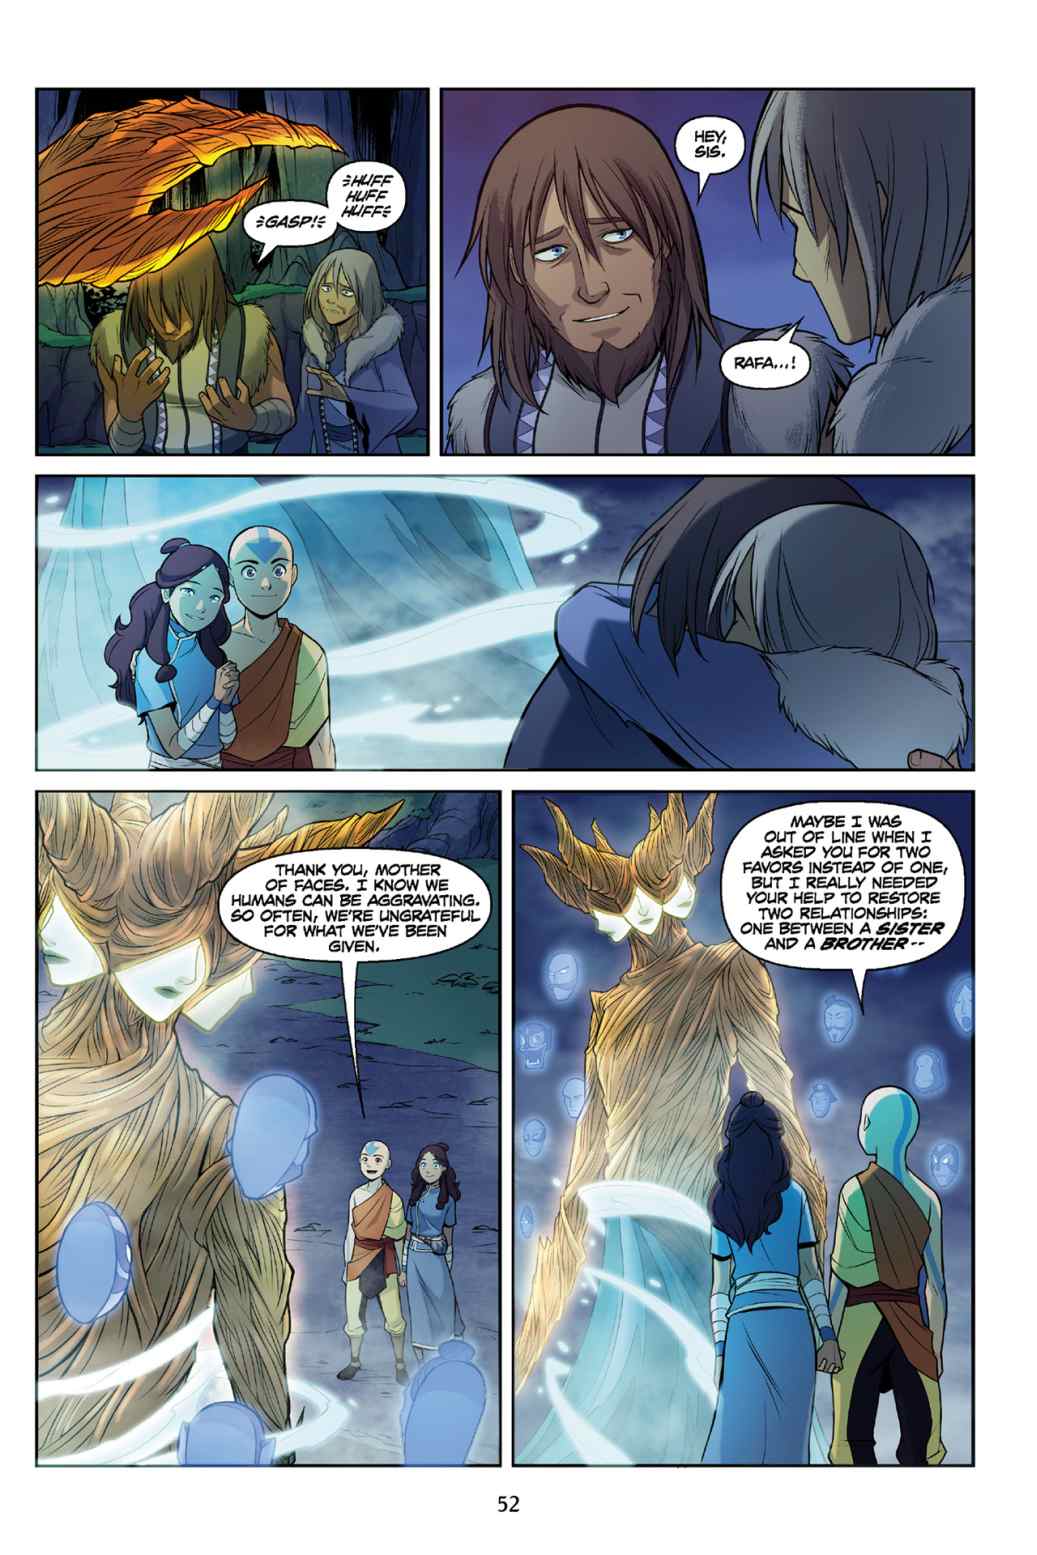 Read Comics Online Free - Avatar The Last Airbender Comic Book Issue #006 -  Page 53